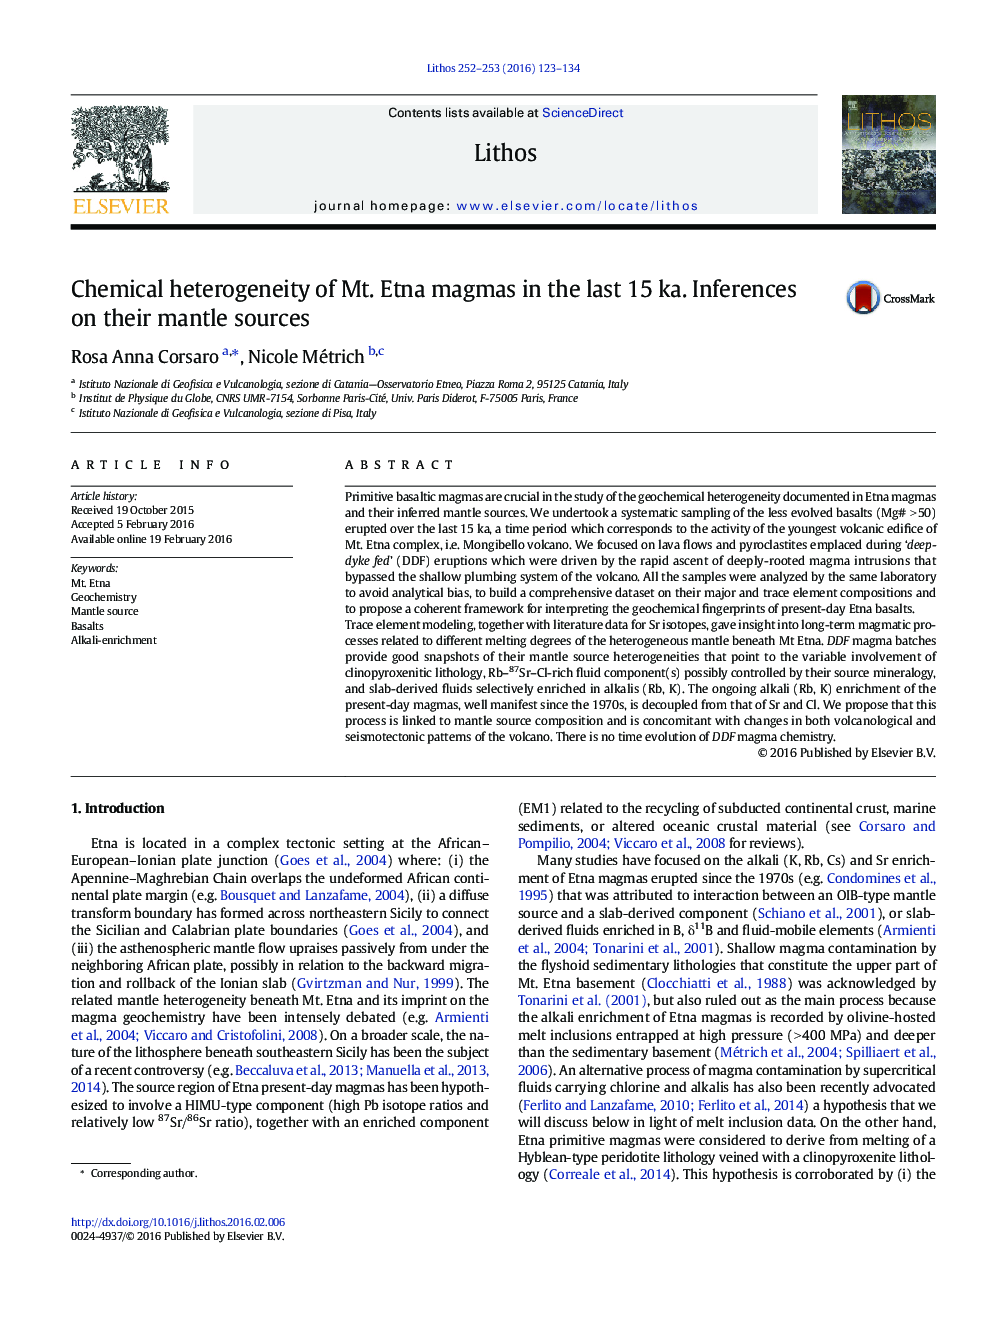 Chemical heterogeneity of Mt. Etna magmas in the last 15 ka. Inferences on their mantle sources